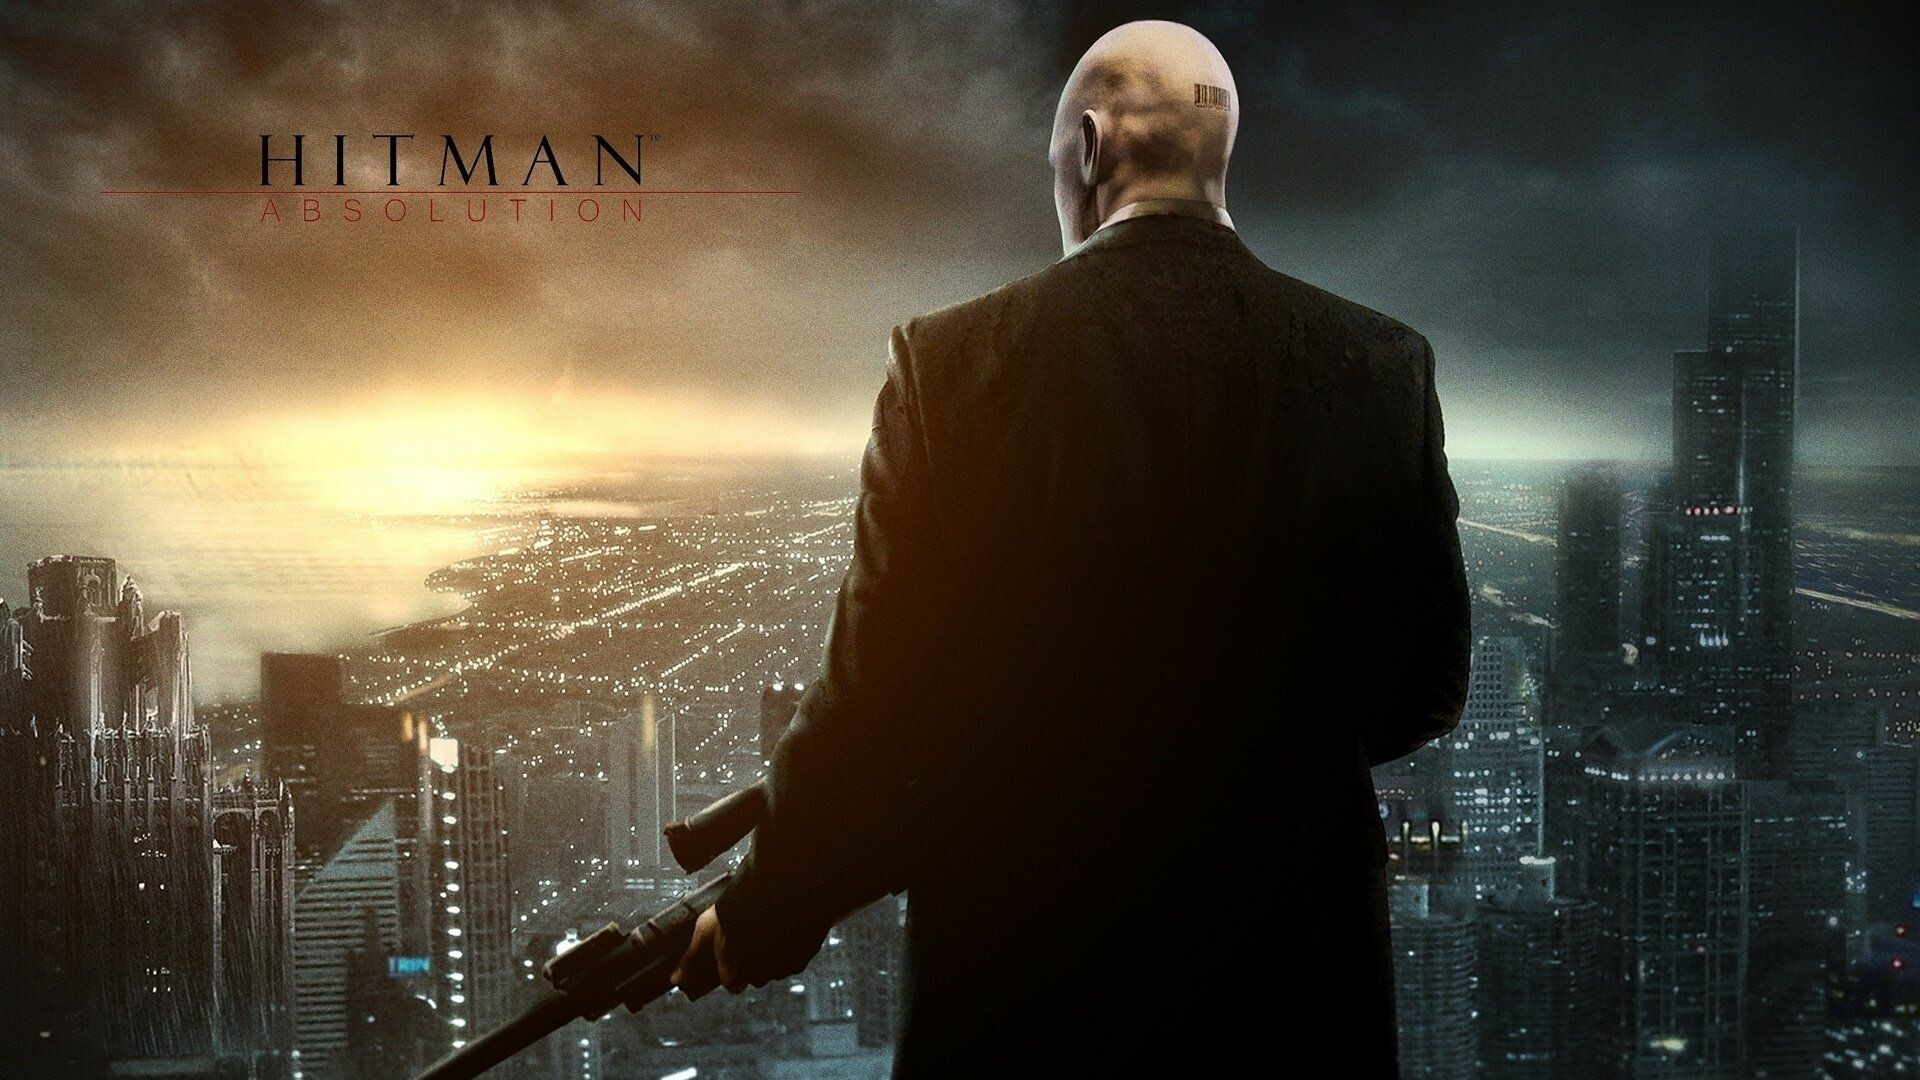 Hitman: Absolution, Stealthy assassinations, Intricate missions, Suspenseful gameplay, 1920x1080 Full HD Desktop